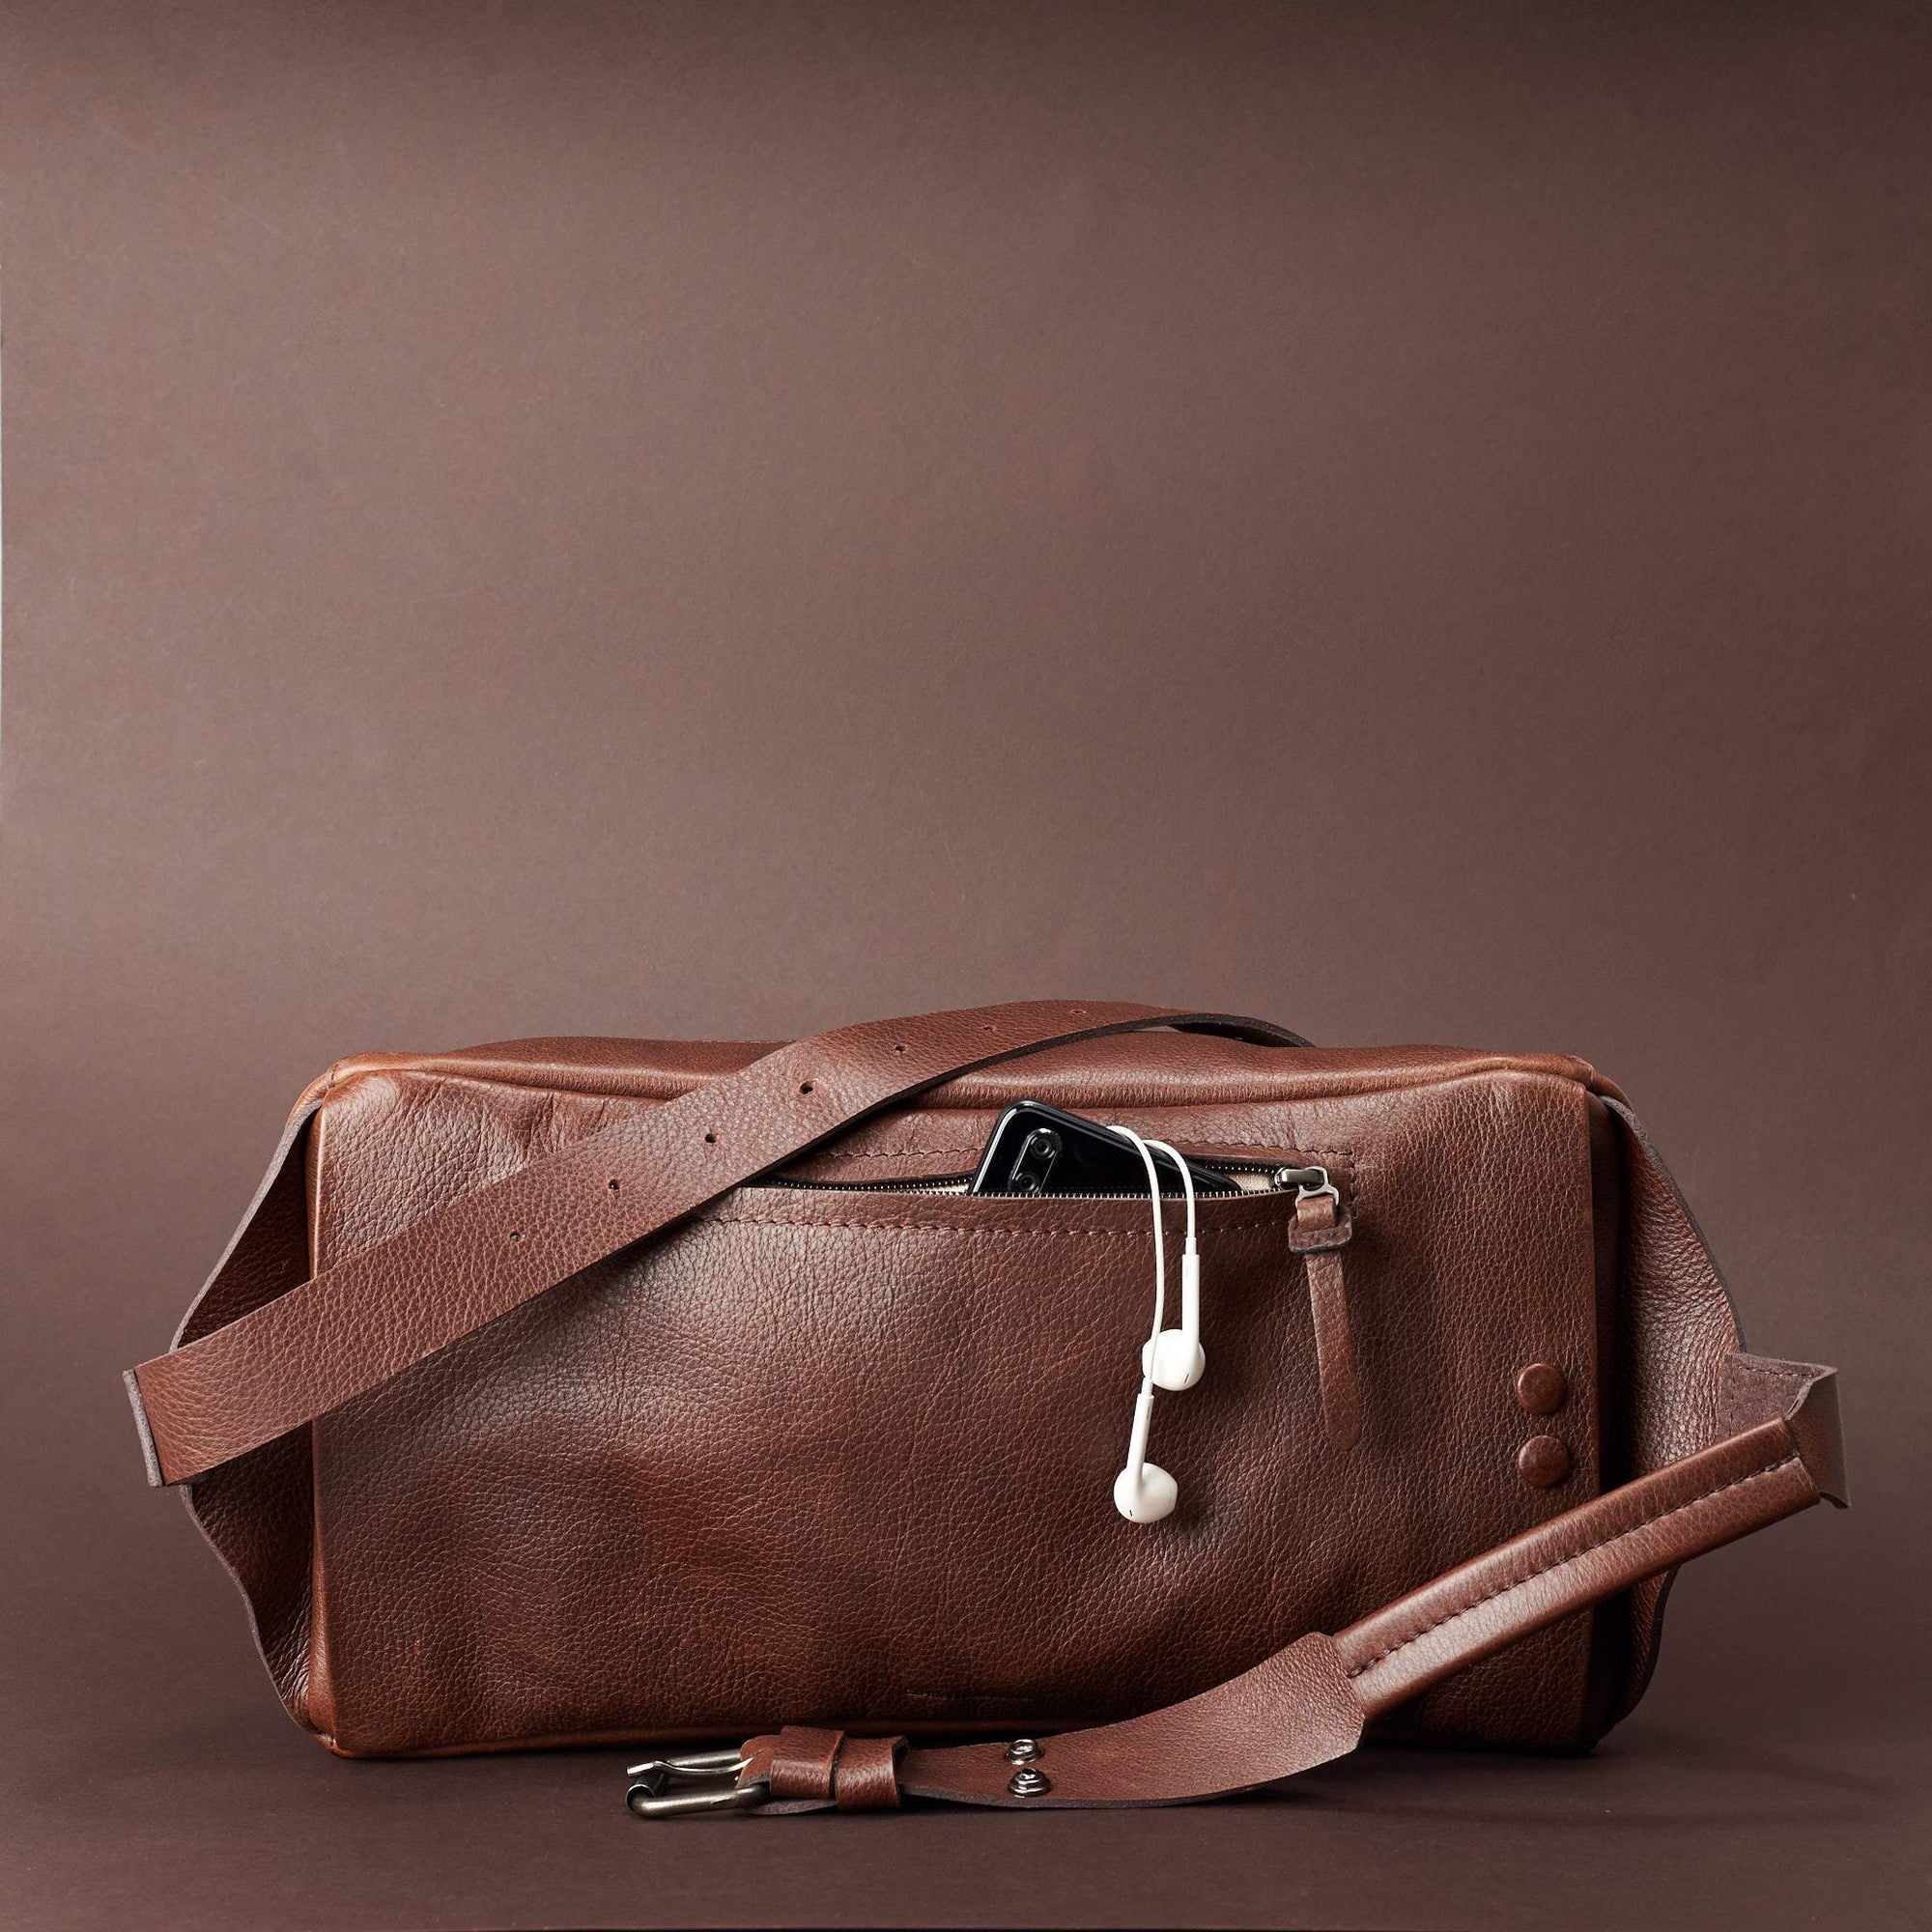 Styling back pocket of leather crossbody for easy access. Fenek Sling Bag Brown by Capra Leather